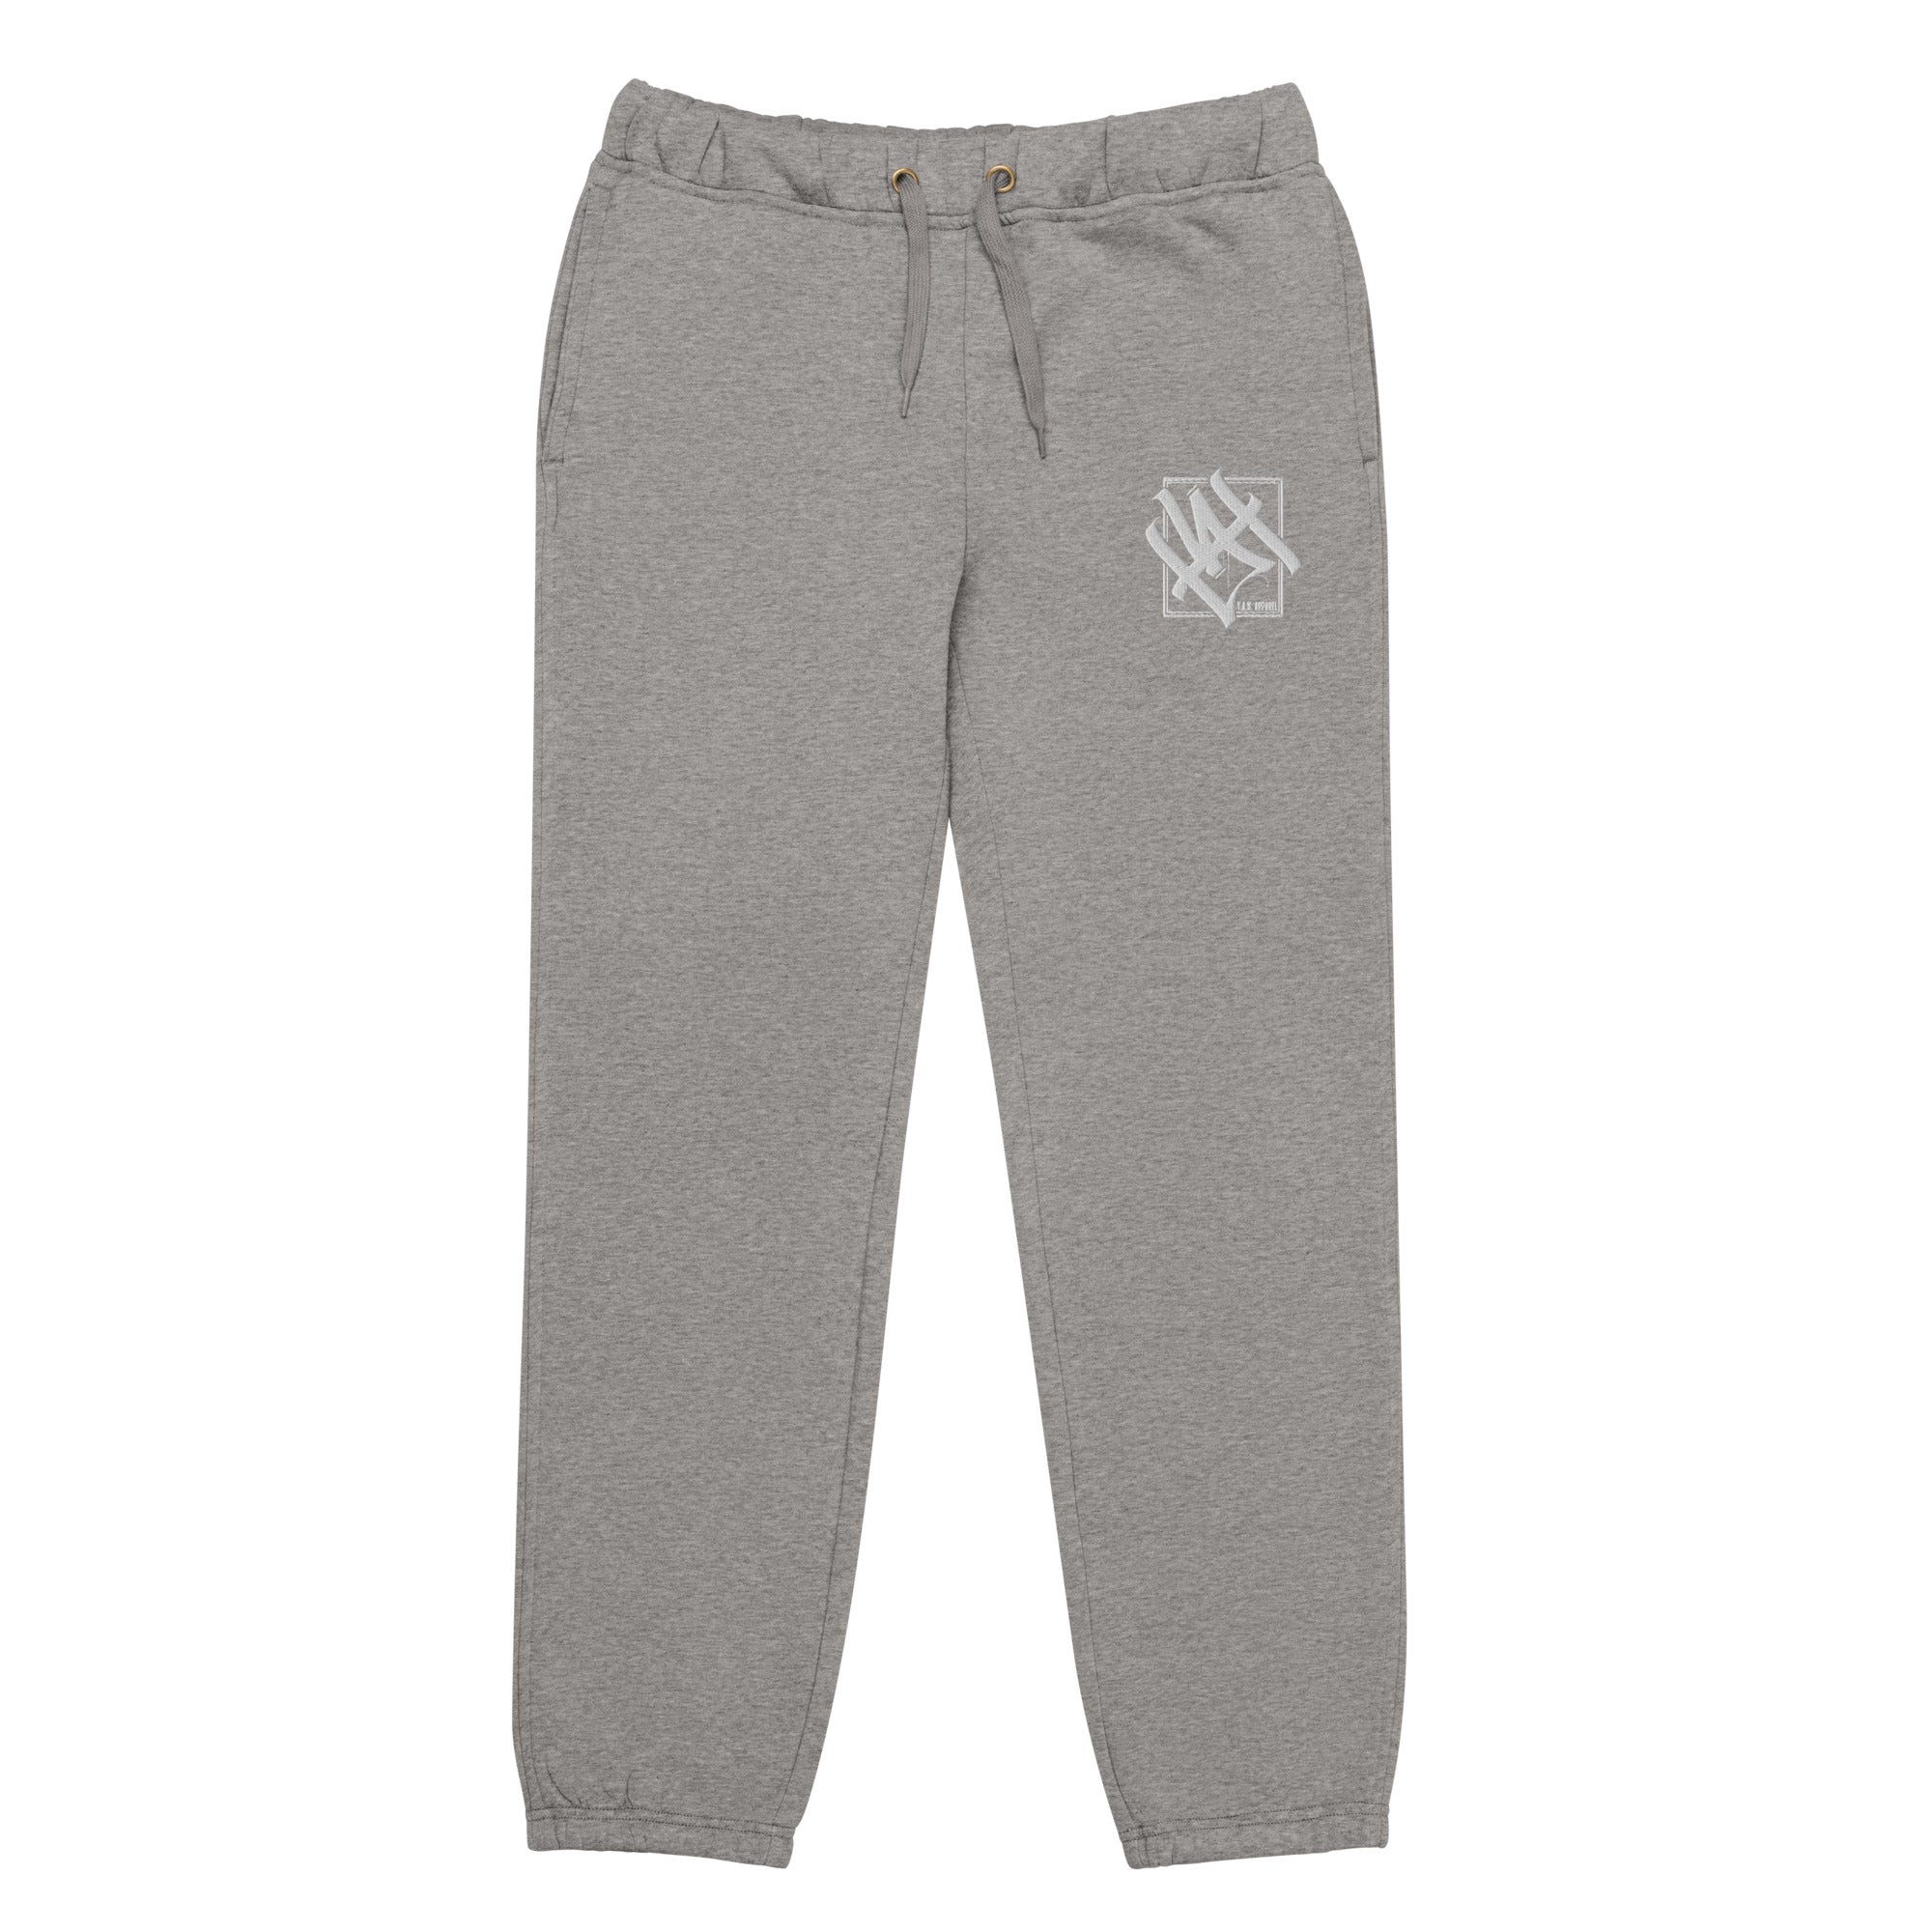 MonoTag Unisex Loose Fit Joggers